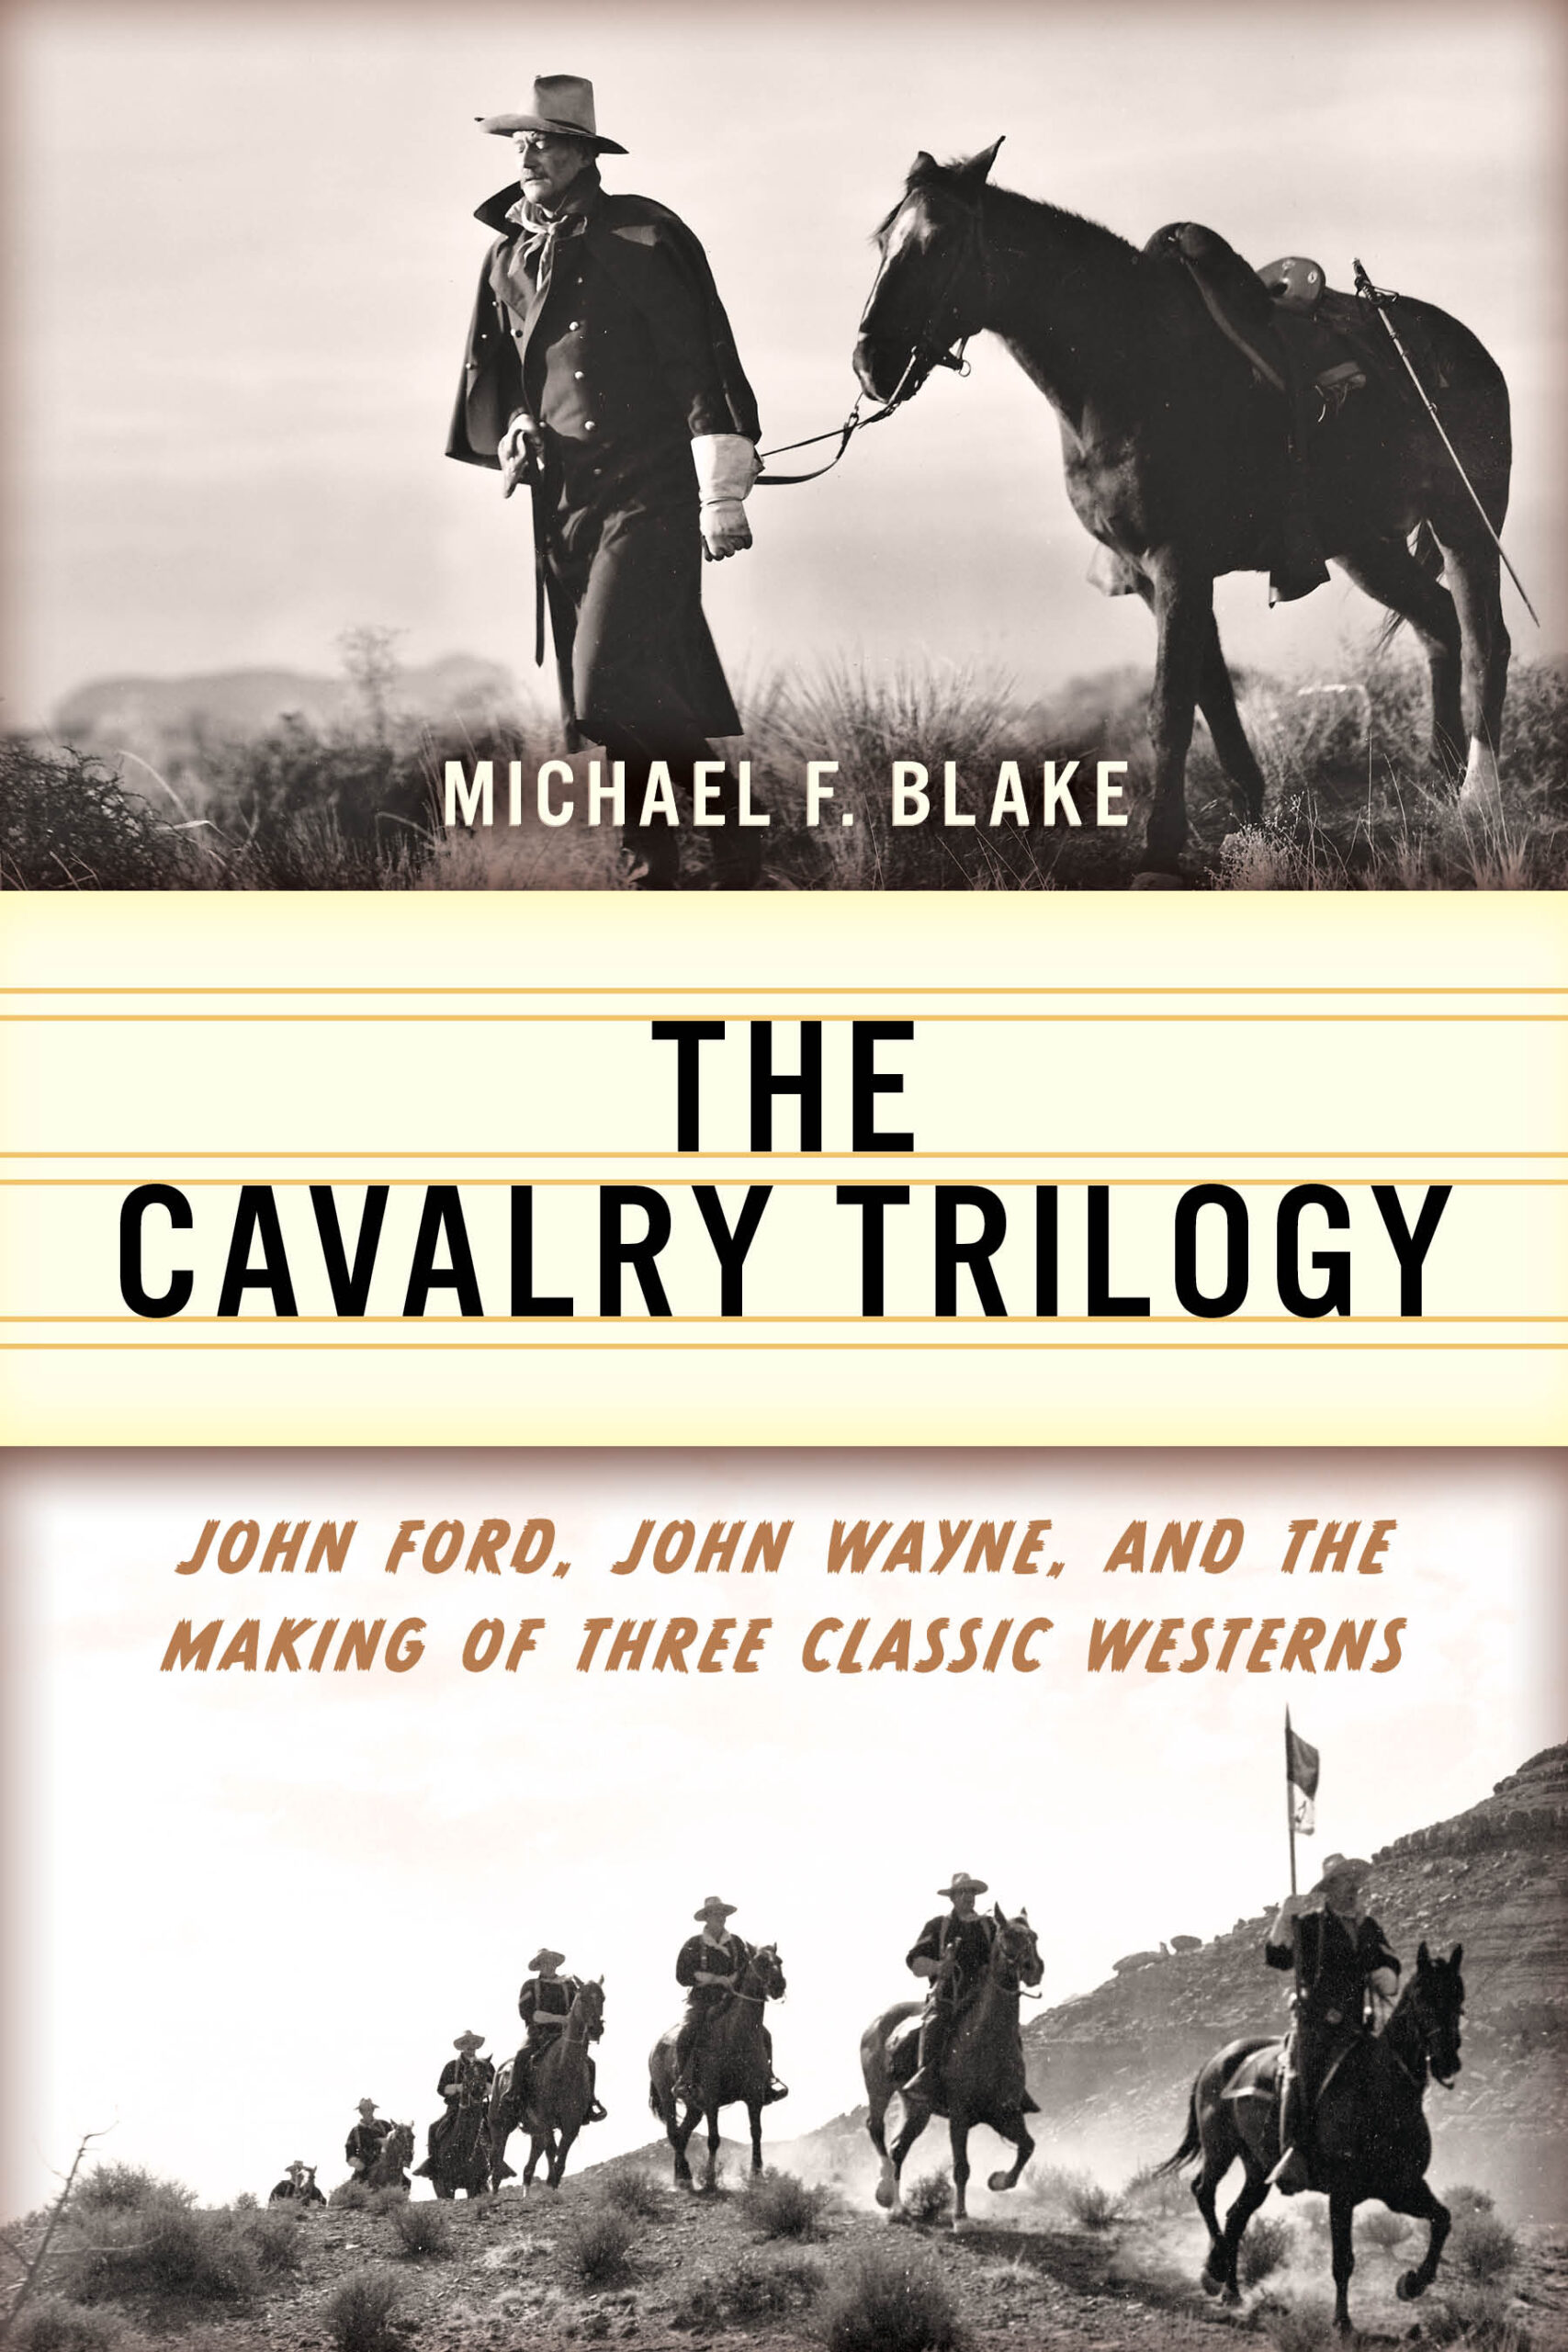 The Cavalry Trilogy book cover